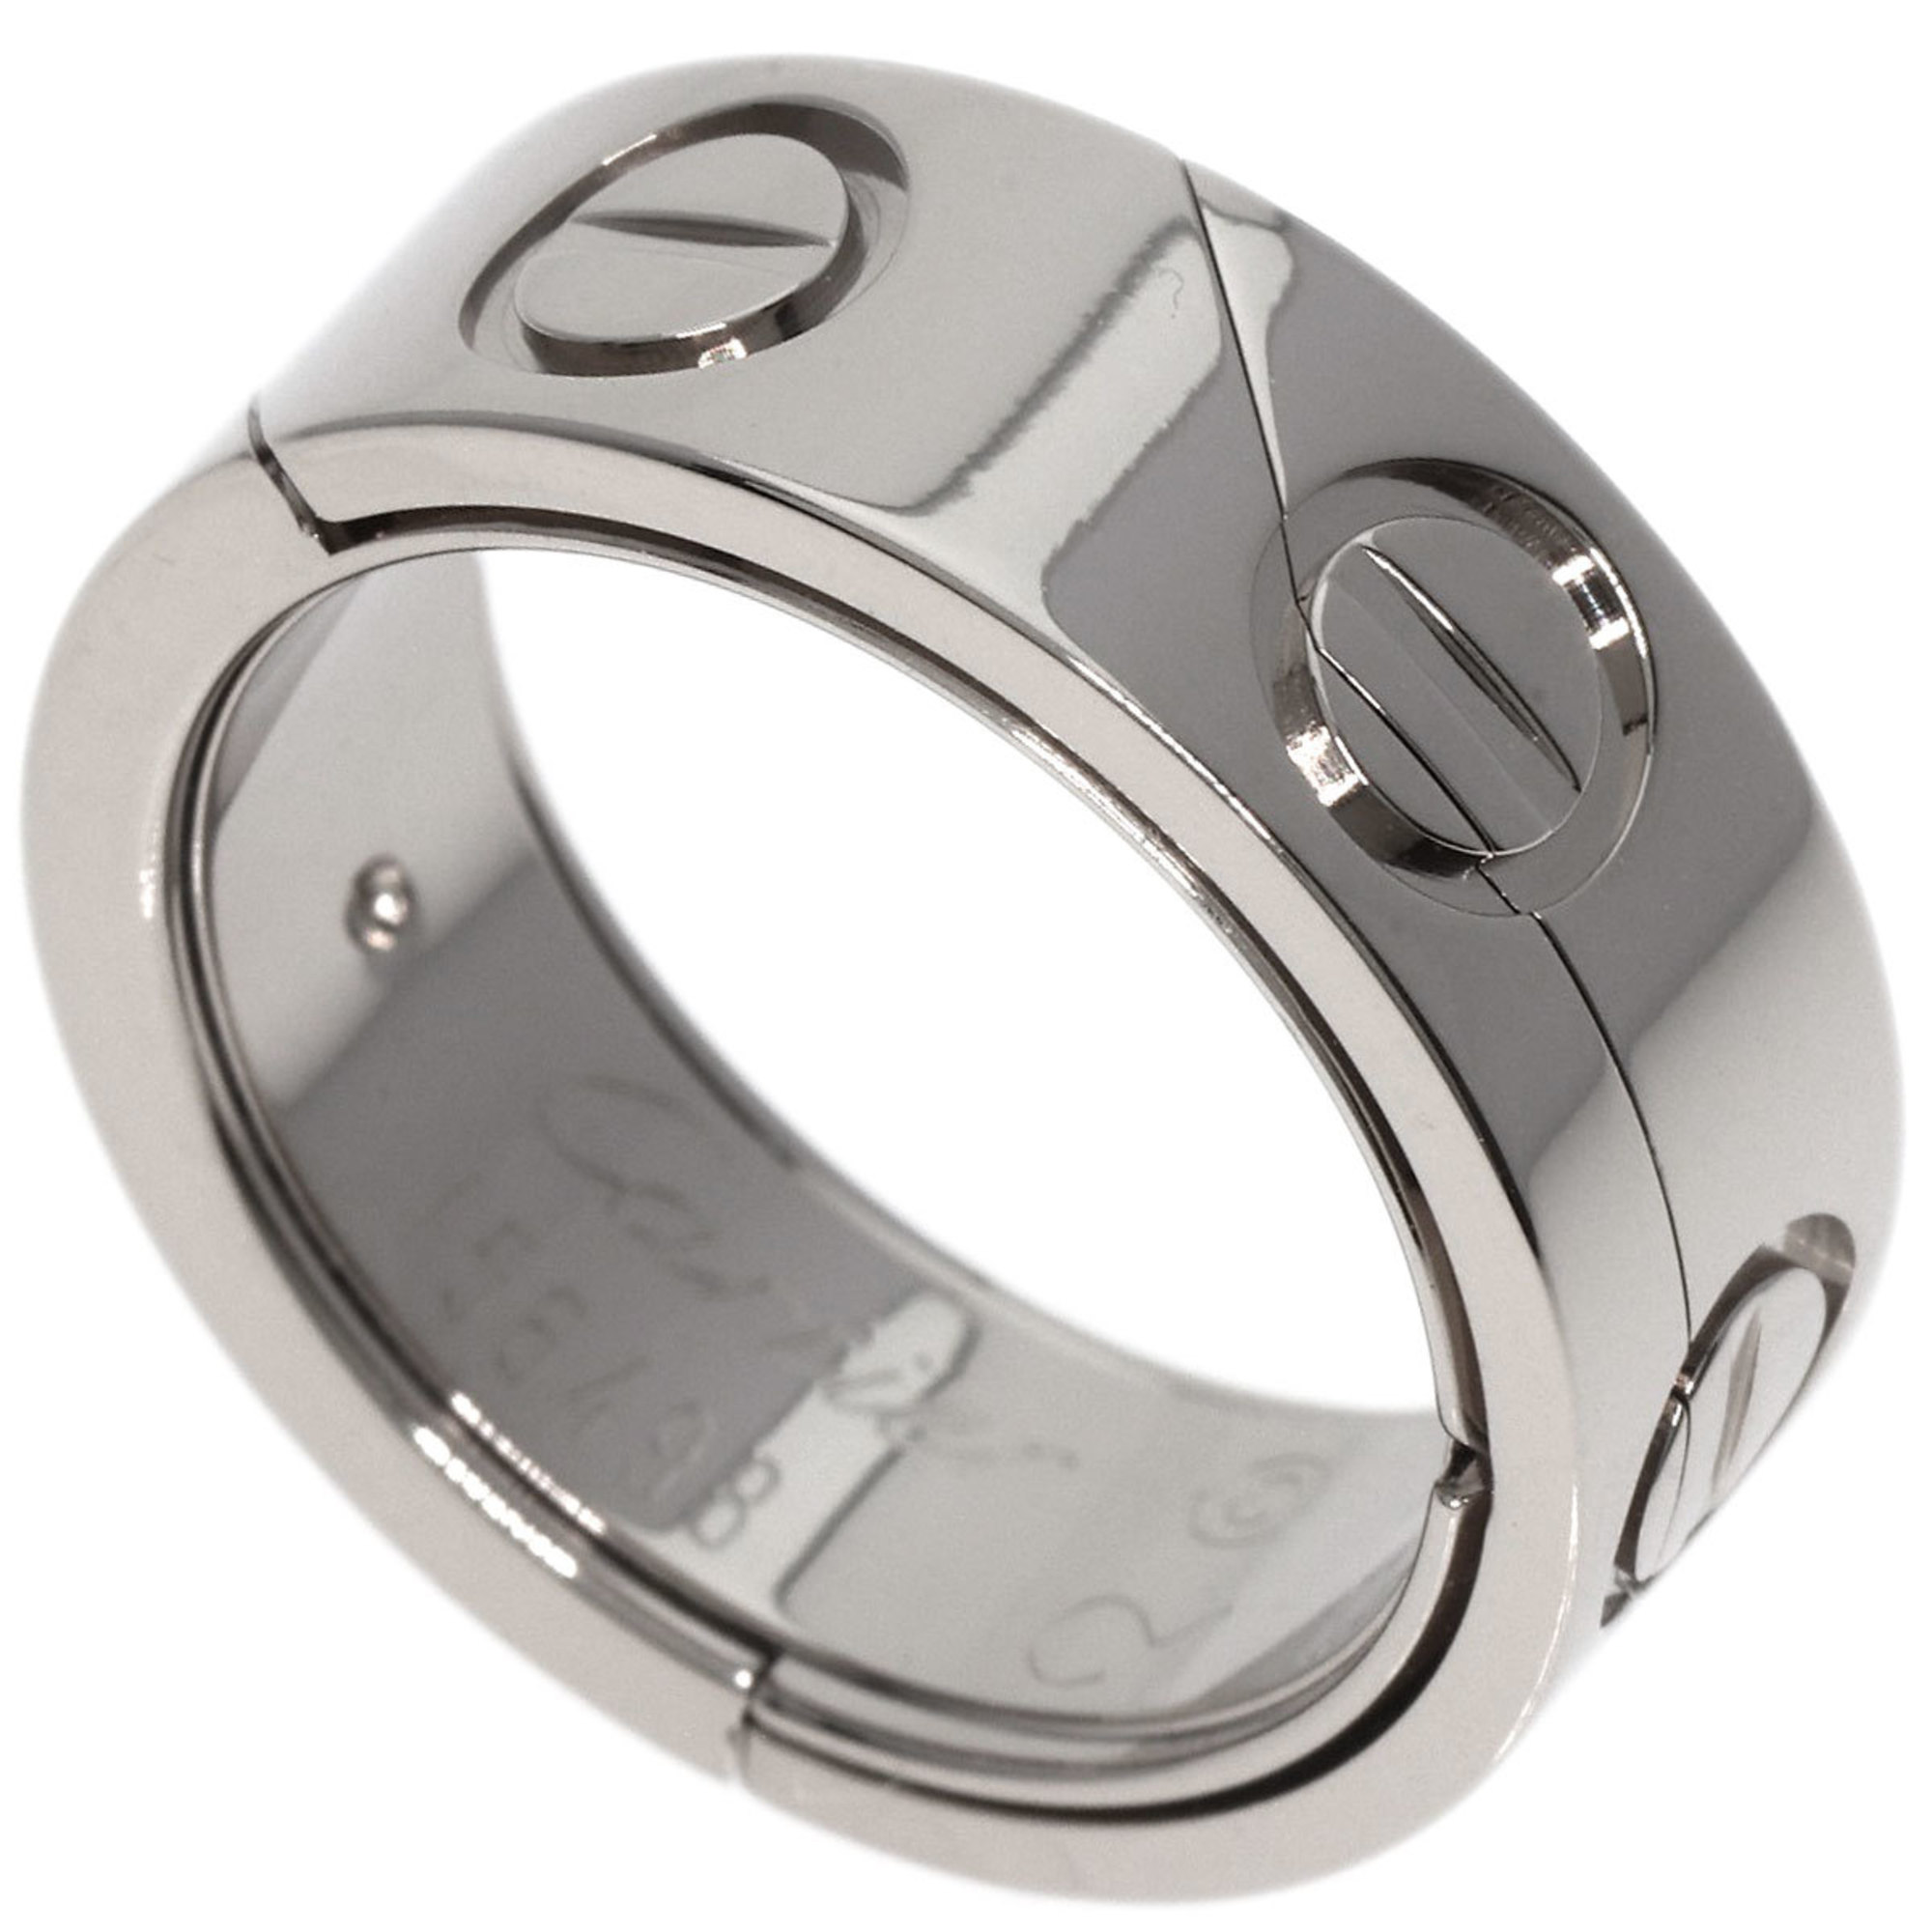 Cartier Astro Love Ring 1999 Limited Edition #49 K18 White Gold Women's CARTIER